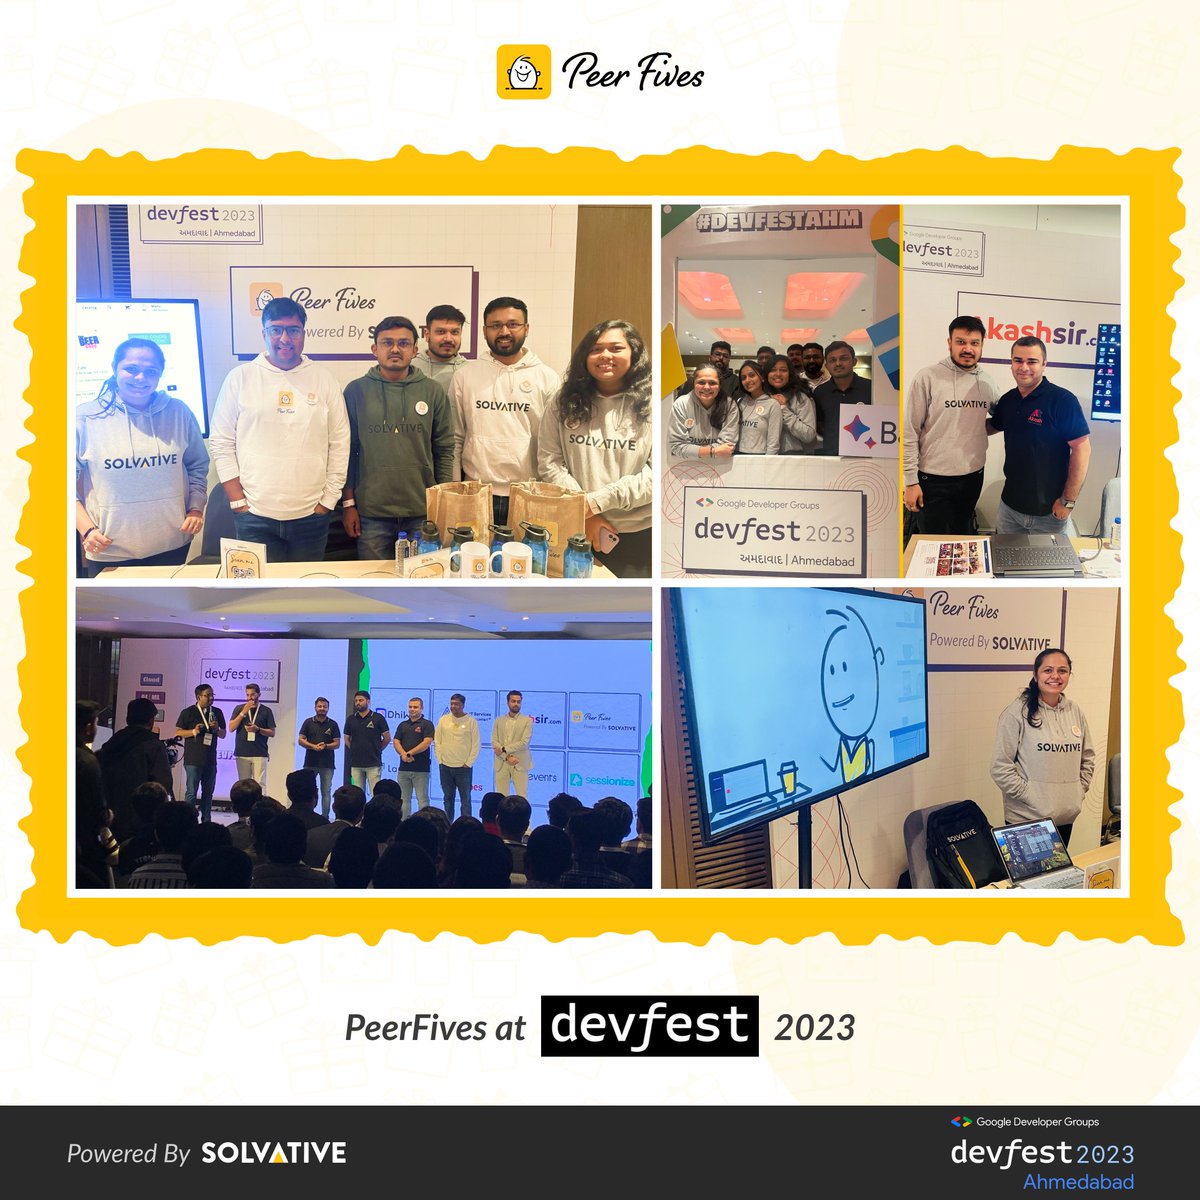 Our presence at @GDGAhmedabad DevFest 2023 was a resounding success! Kudos to our passionate team and attendees who ignited the spirit of appreciation with @PeerFives. #DevFestAhm #GDG #DevFest #DevFest23 #DevFest2023 #Peerfives